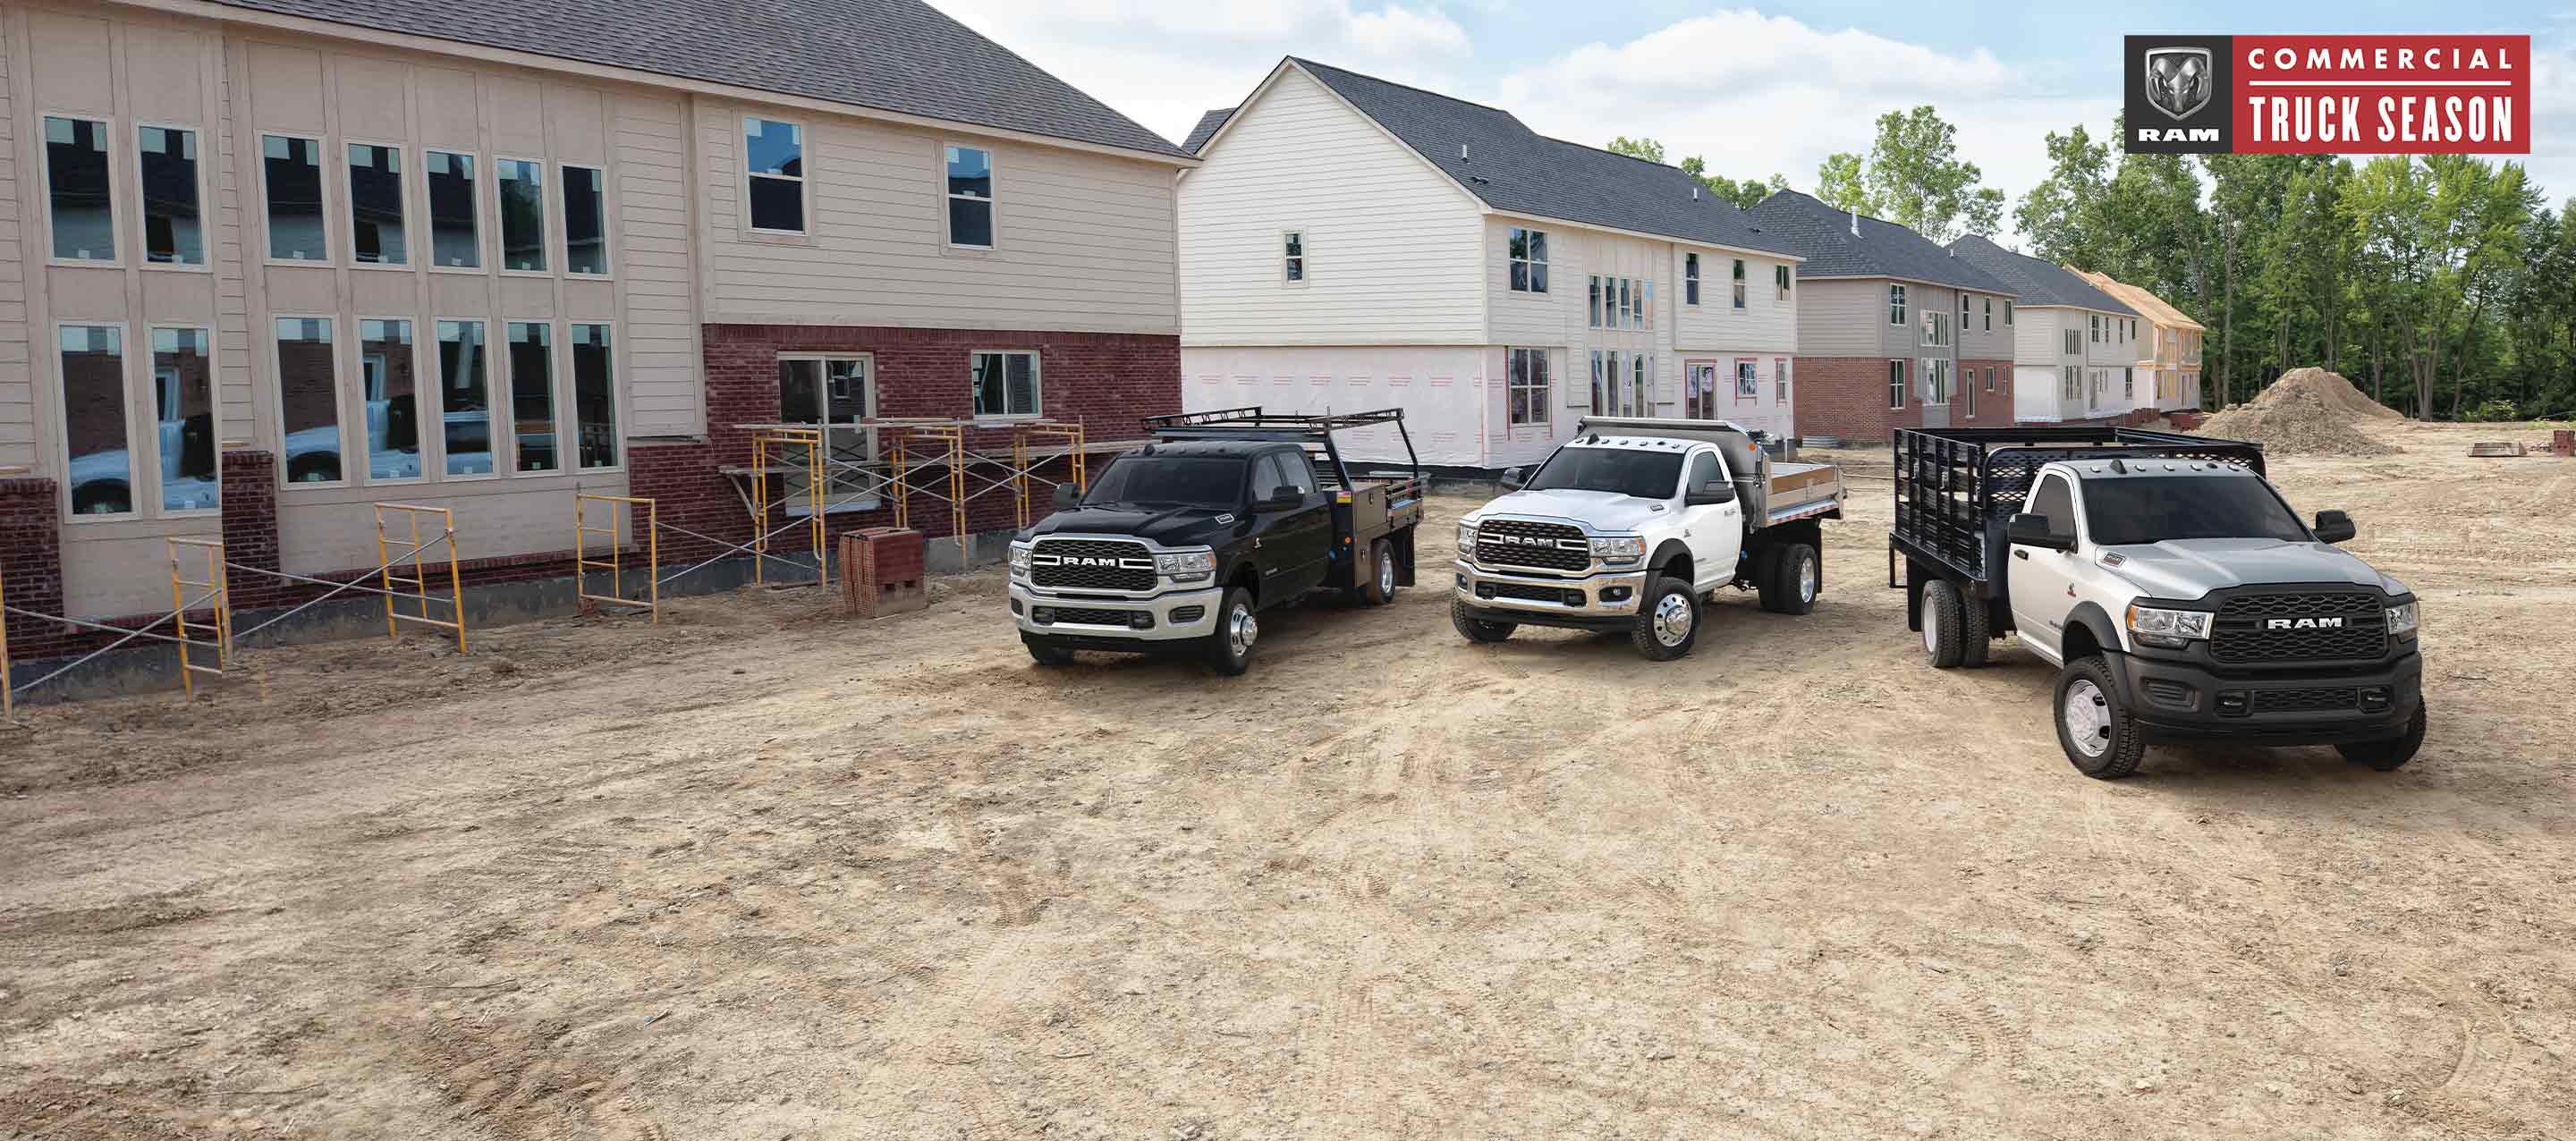 The 2022 Ram 3500 Tradesman 4x4 with Crew Cab; the 2022 Ram 5500 SLT 4x4 with Regular Cab and the 2022 Ram 4500 Tradesman 4x4 with Regular Cab parked on a construction site. Ram Commercial Truck season.